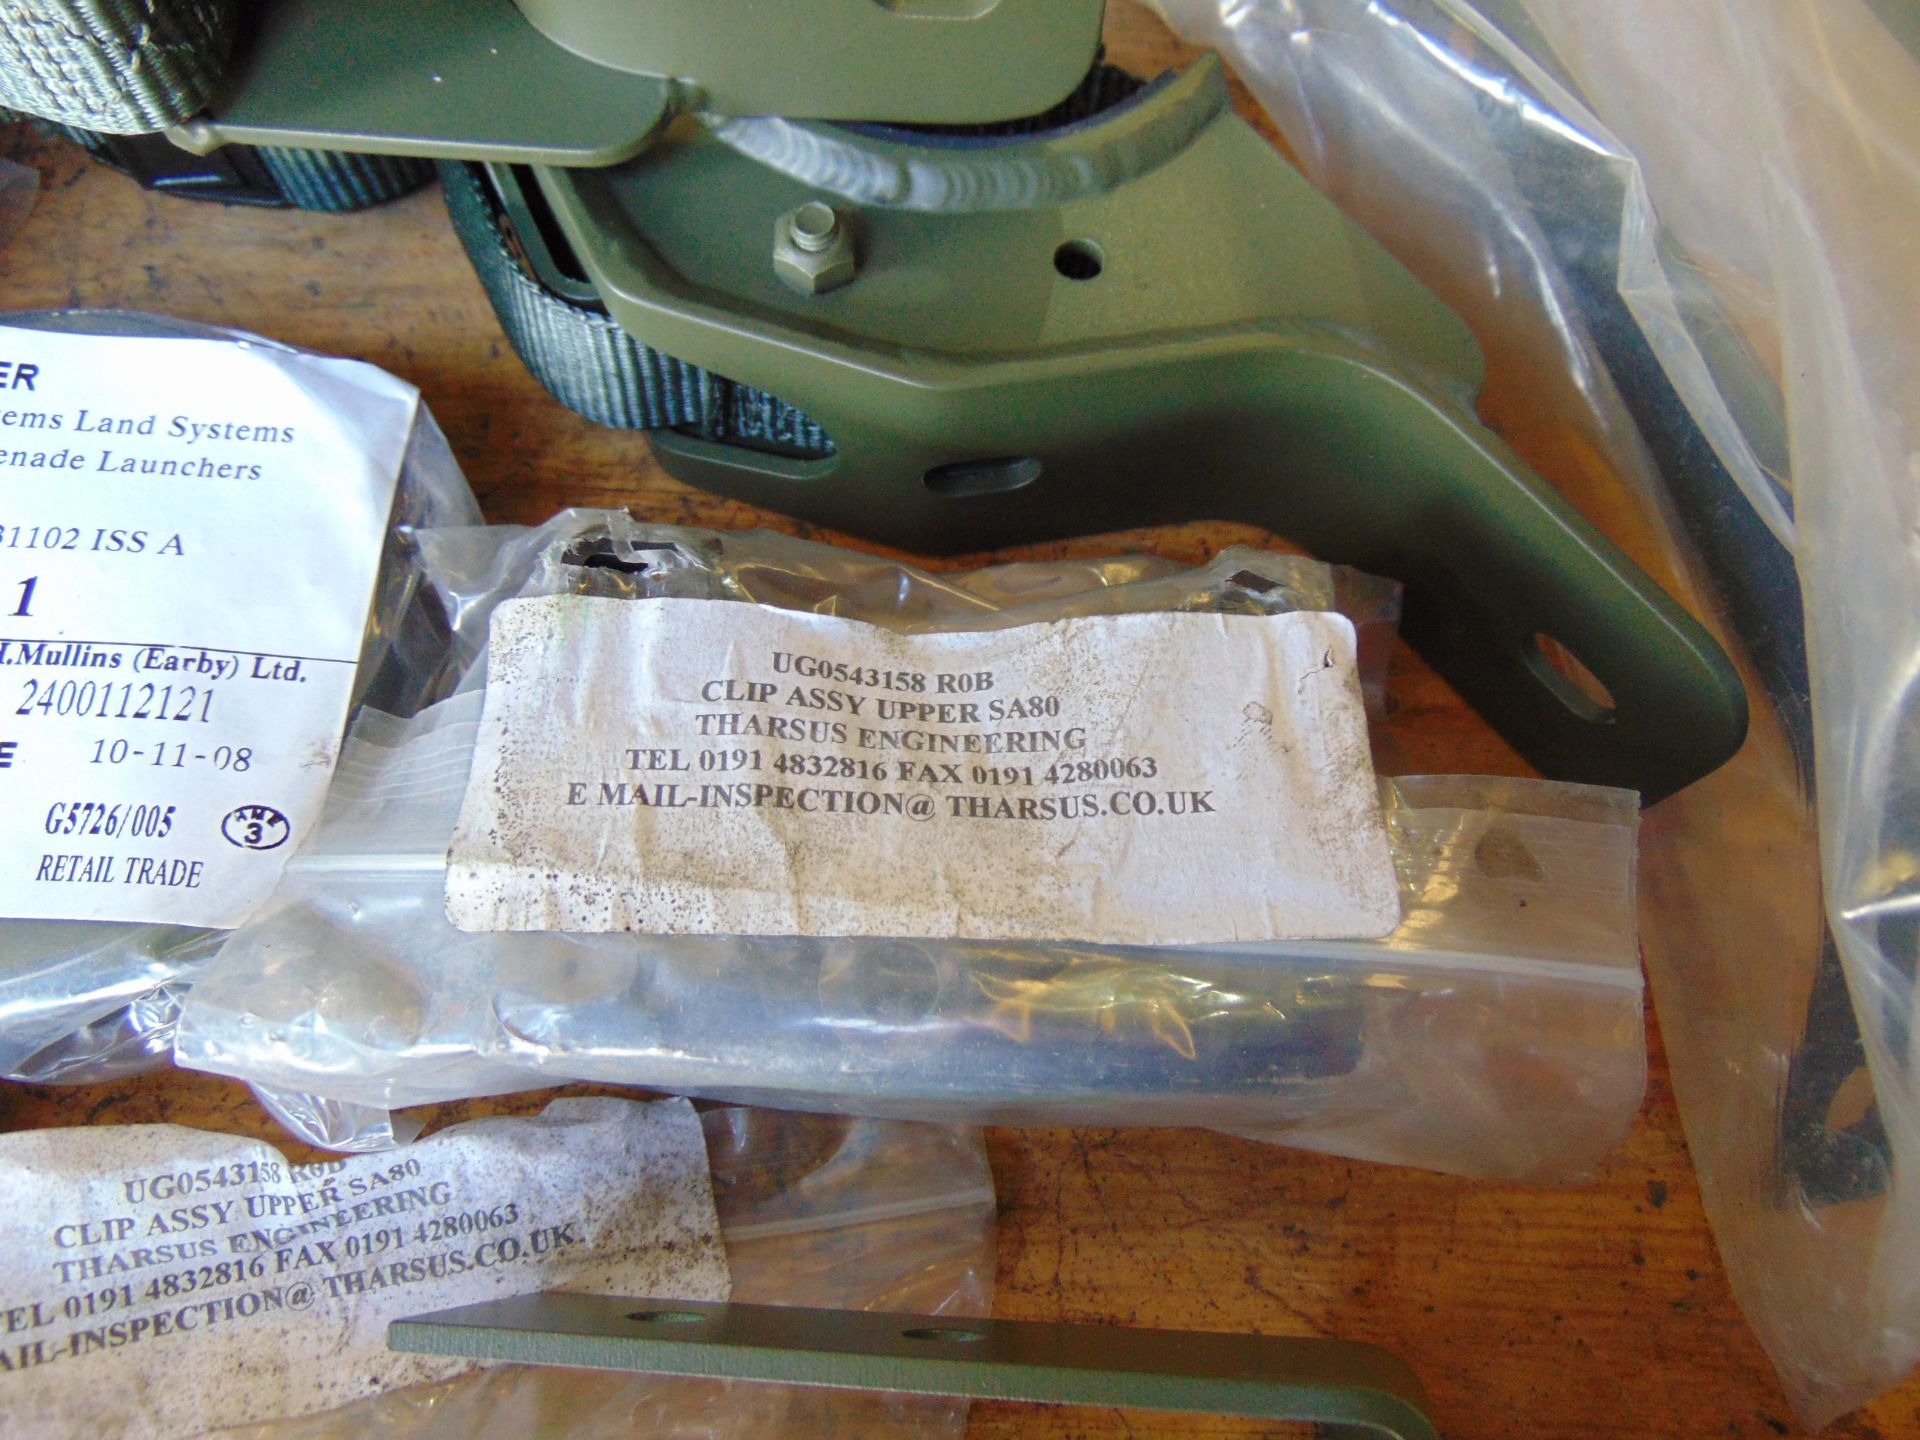 New Unissued WIMIK SA 80 Clips Launcher Covers, Stowage Straps, Barrel Clamps etc - Image 7 of 9